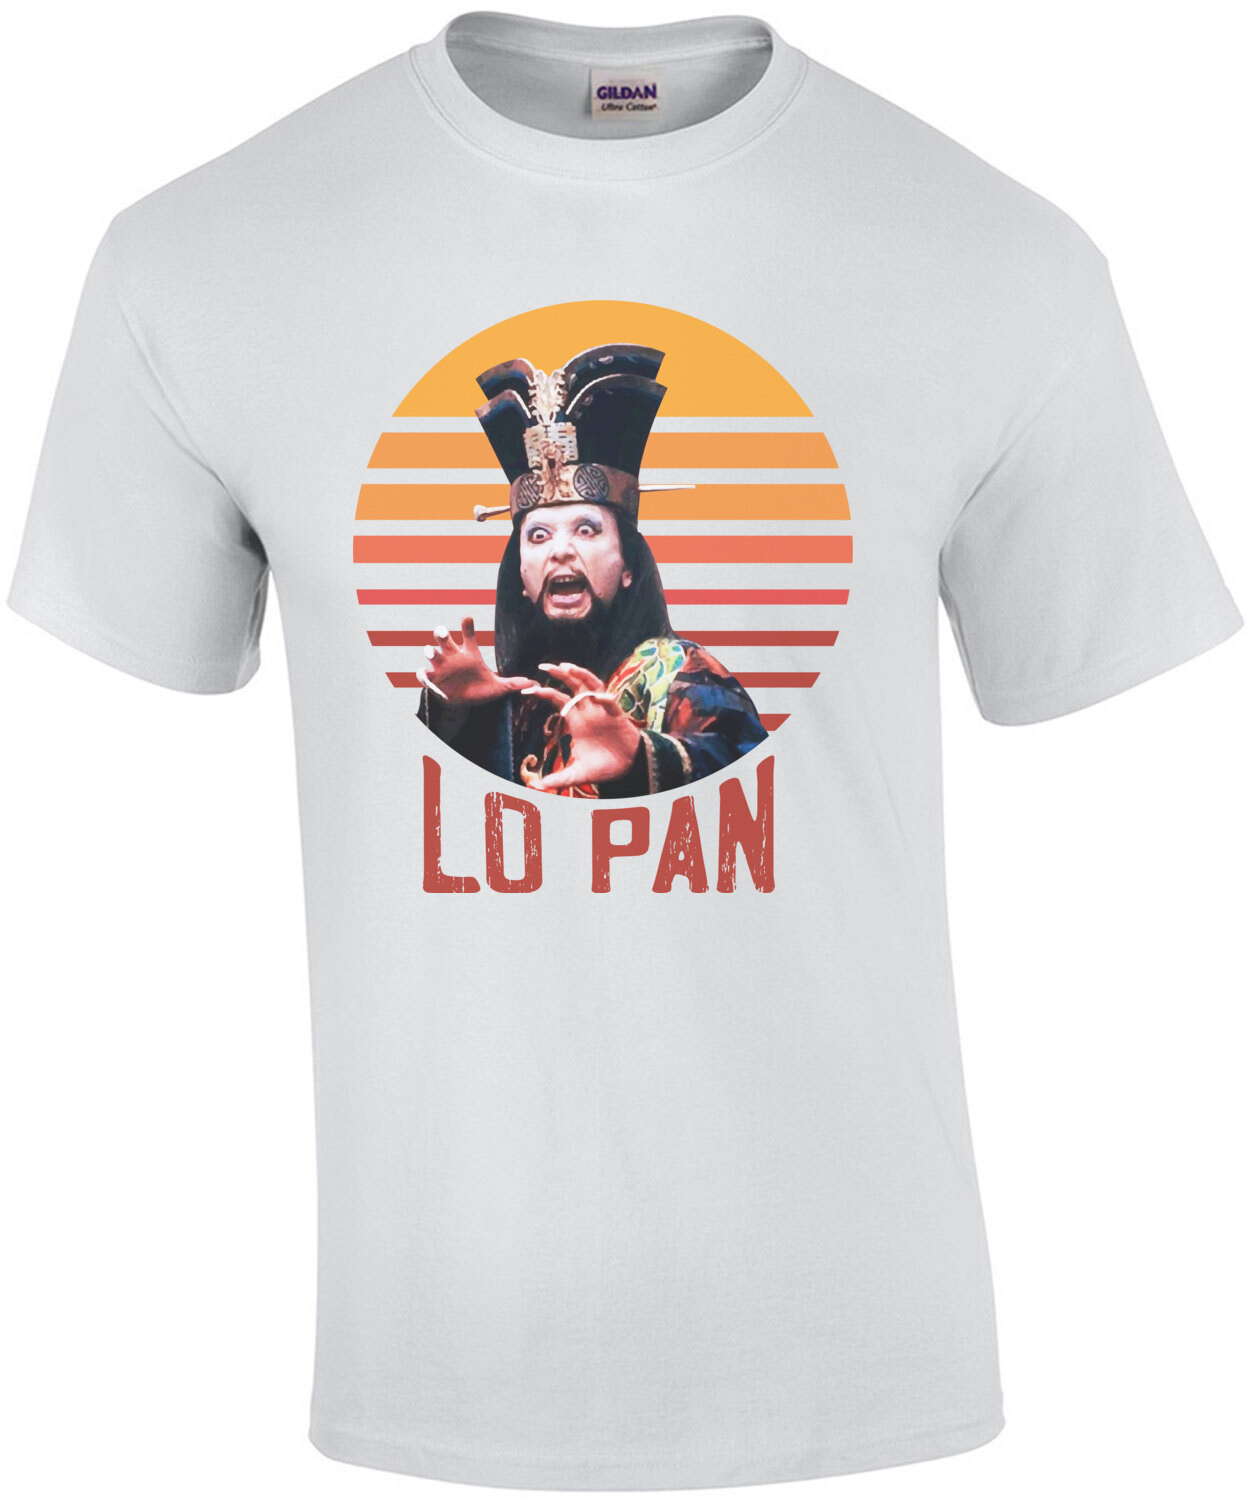 Lo Pan - Big Trouble In Little China - 80's T-Shirt